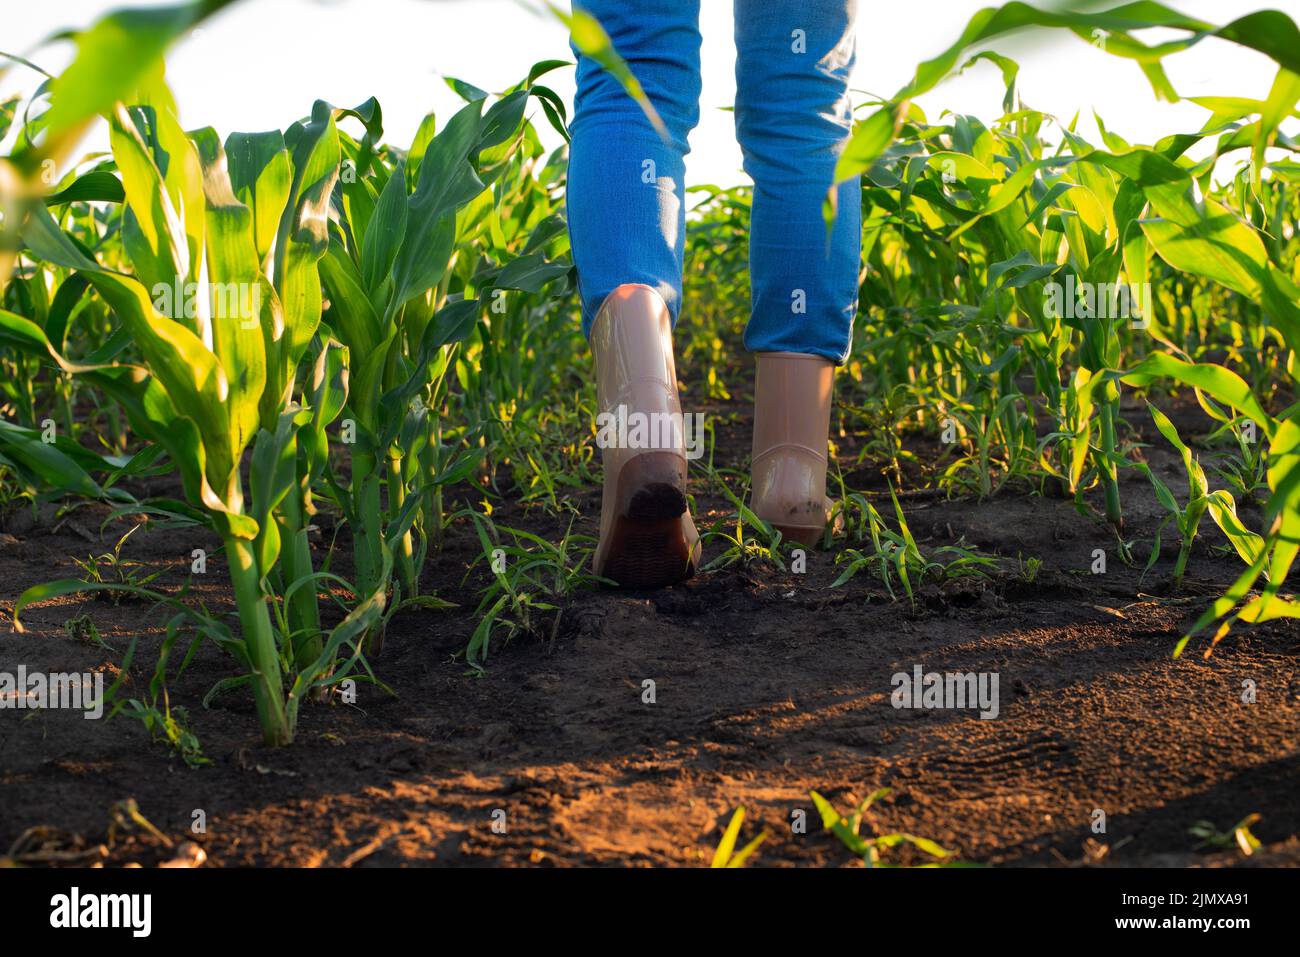 Low angle view at female farmer's feet in rubber boots walking along maize stalks Stock Photo